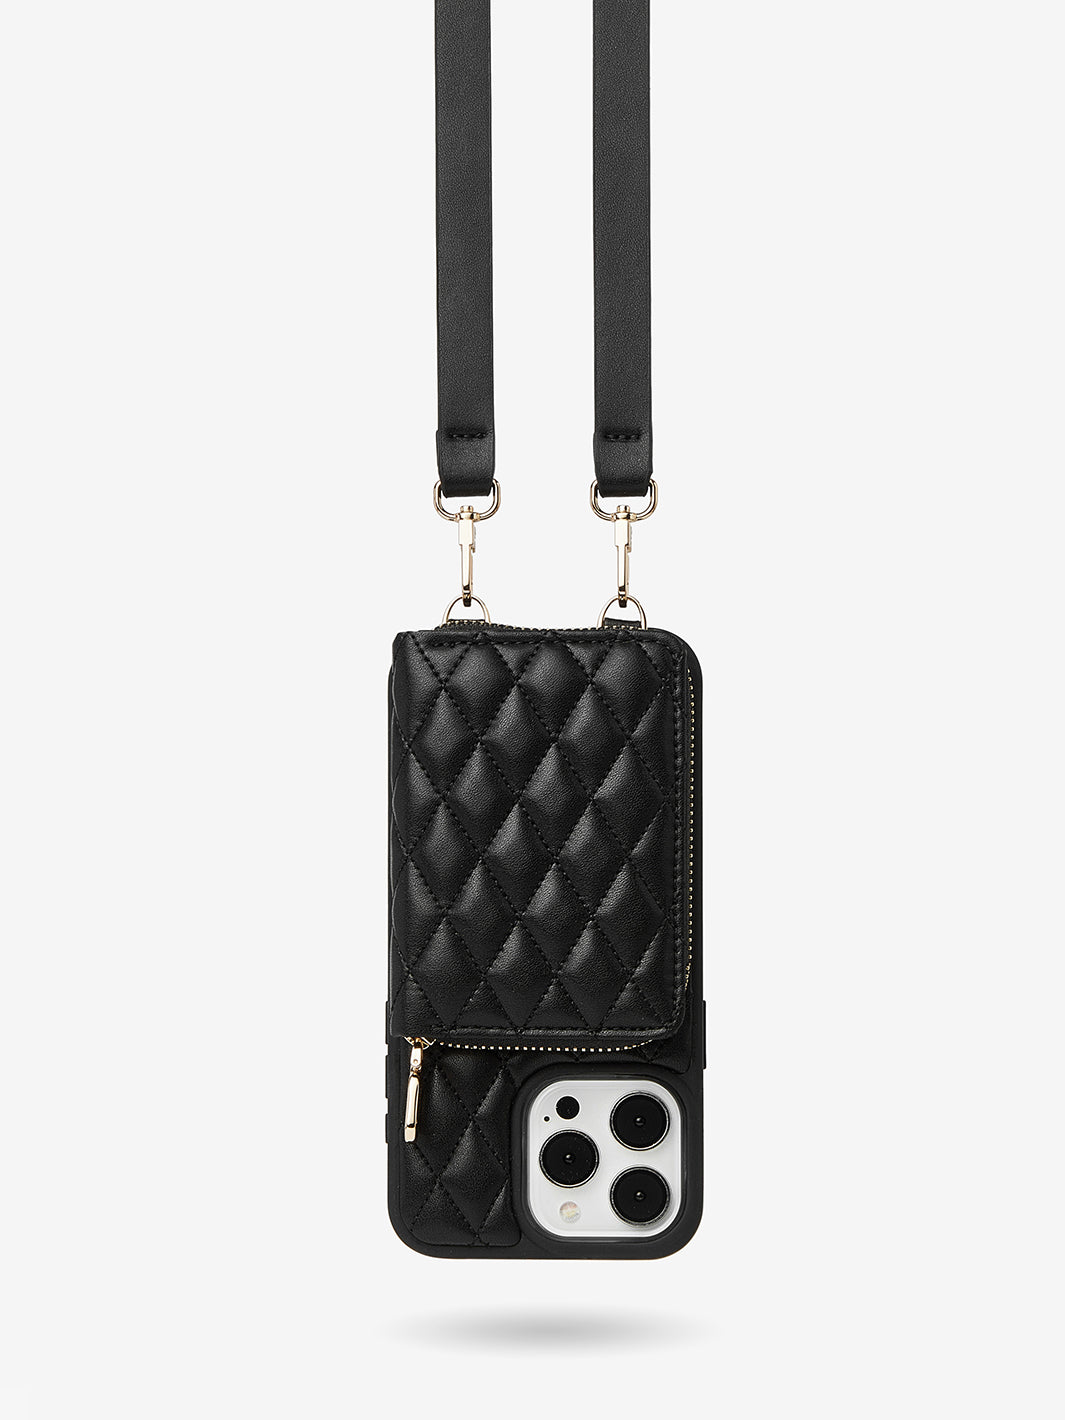 Custype wallet iPhone case with crossbody strap in black phone cover